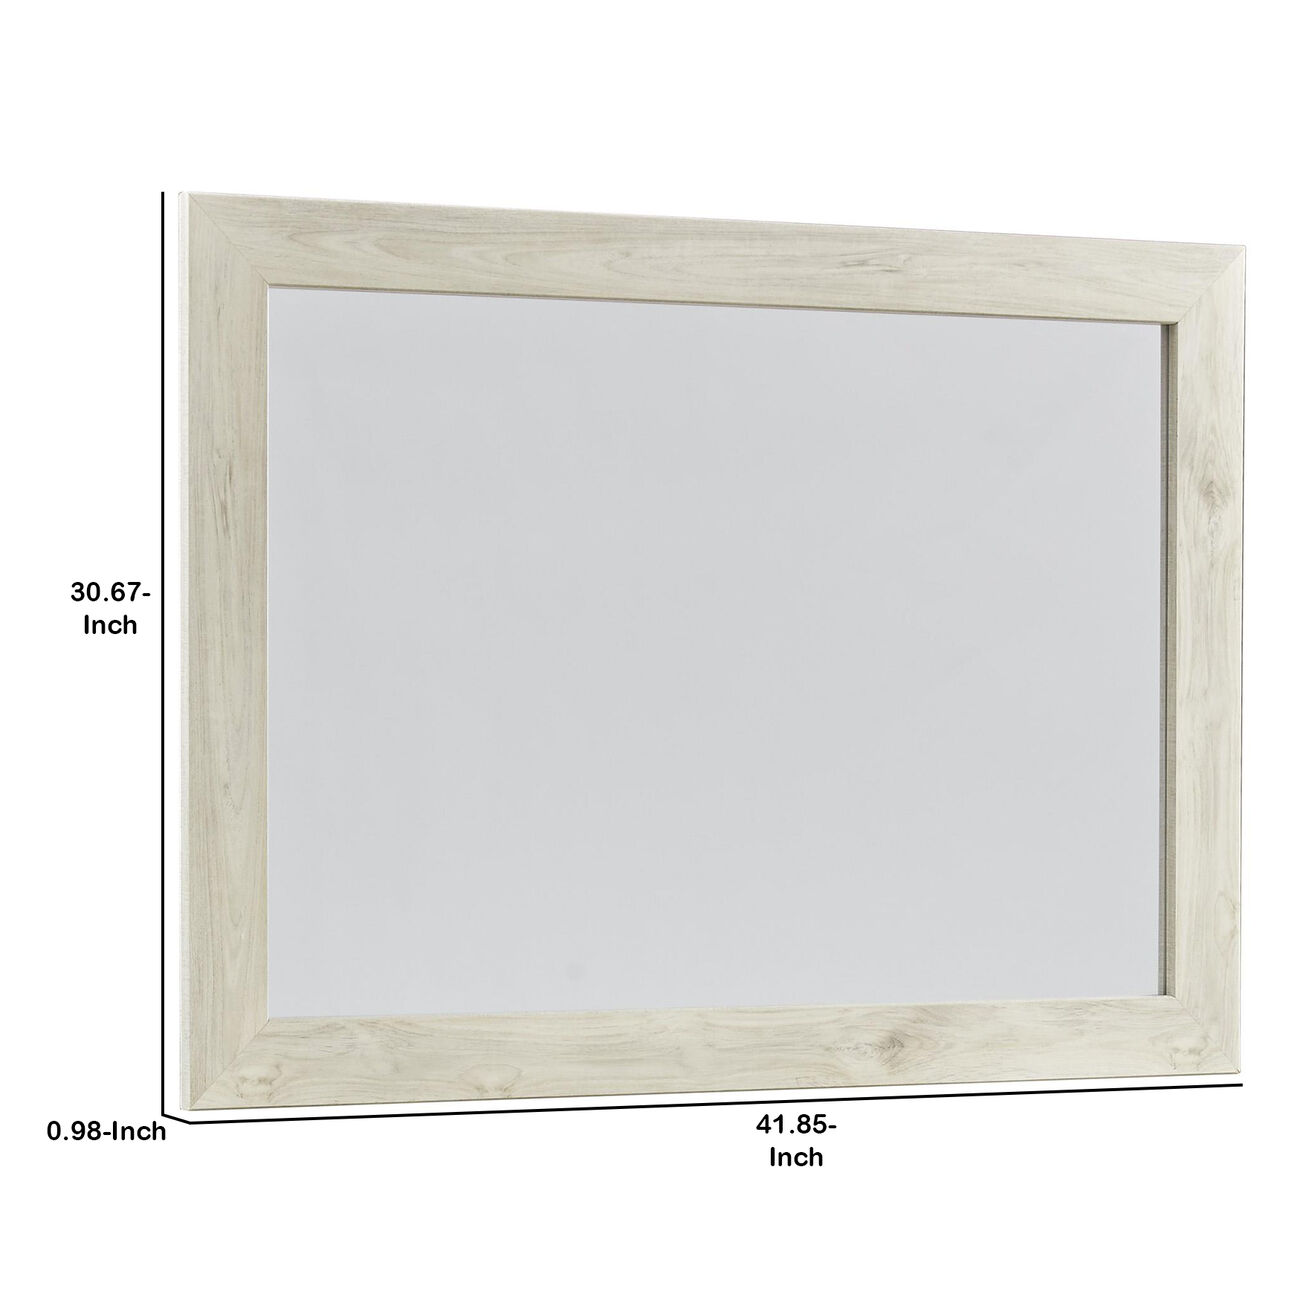 Contemporary Bedroom Mirror with Wood Grain Texture, White and Silver